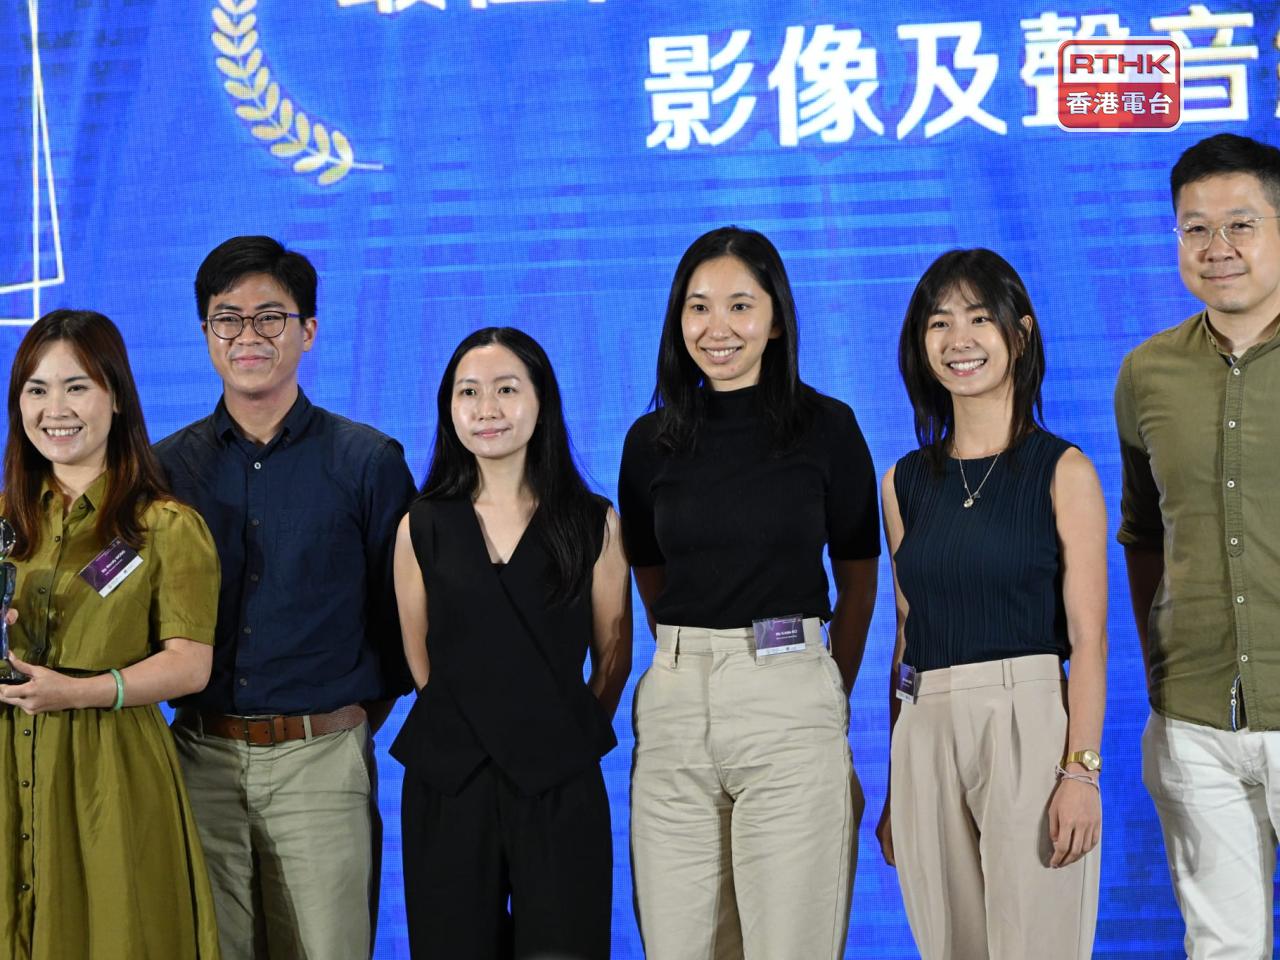 RTHK wins best business technology reporting award